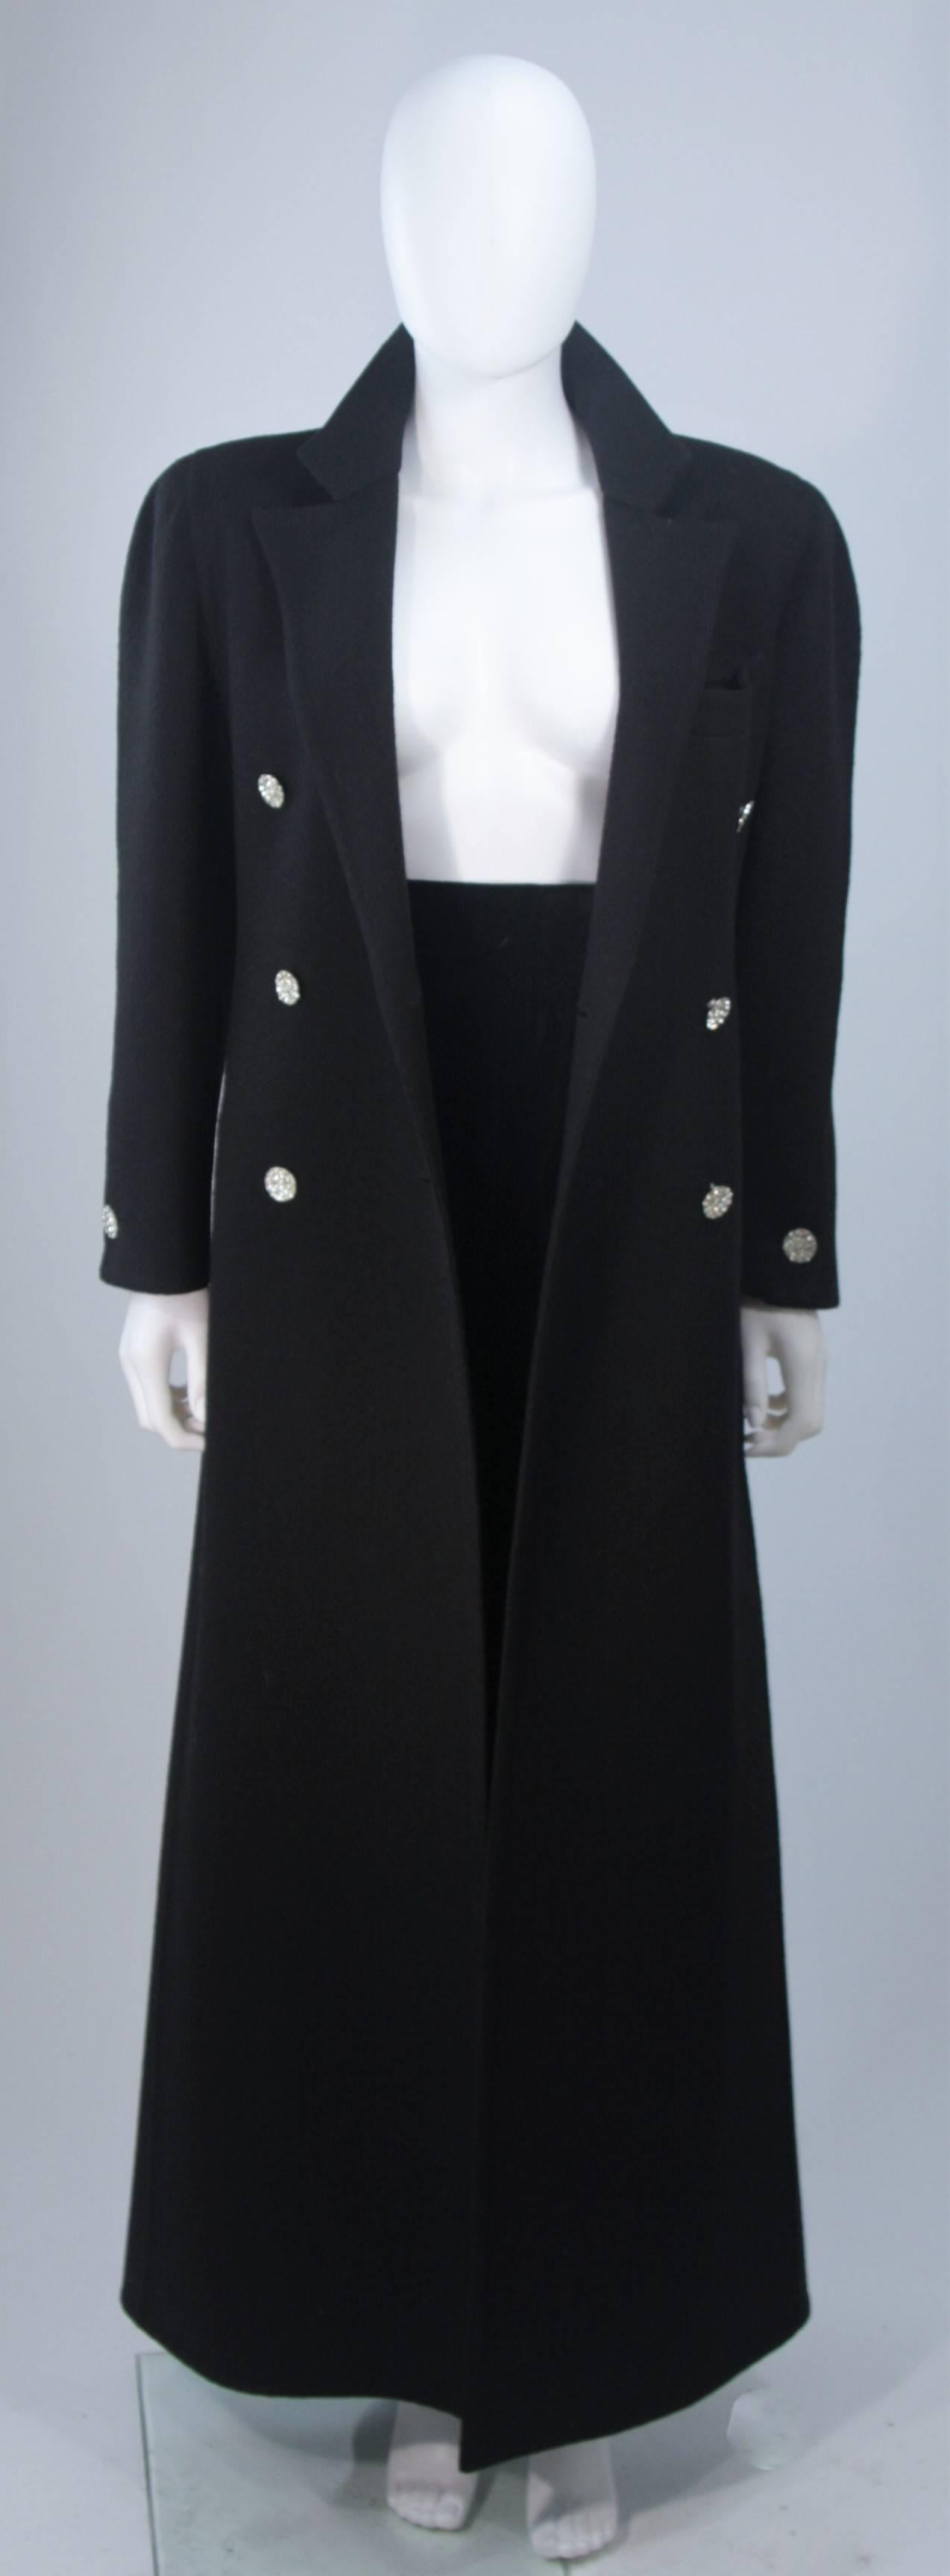  This Bill Blass ensemble is features a full length wool coat with rhinestone buttons and silk tuxedo style pants with a velvet panel. The pants have a side pockets and a zipper closure with hook and eye. In excellent vintage condition. 

**Please